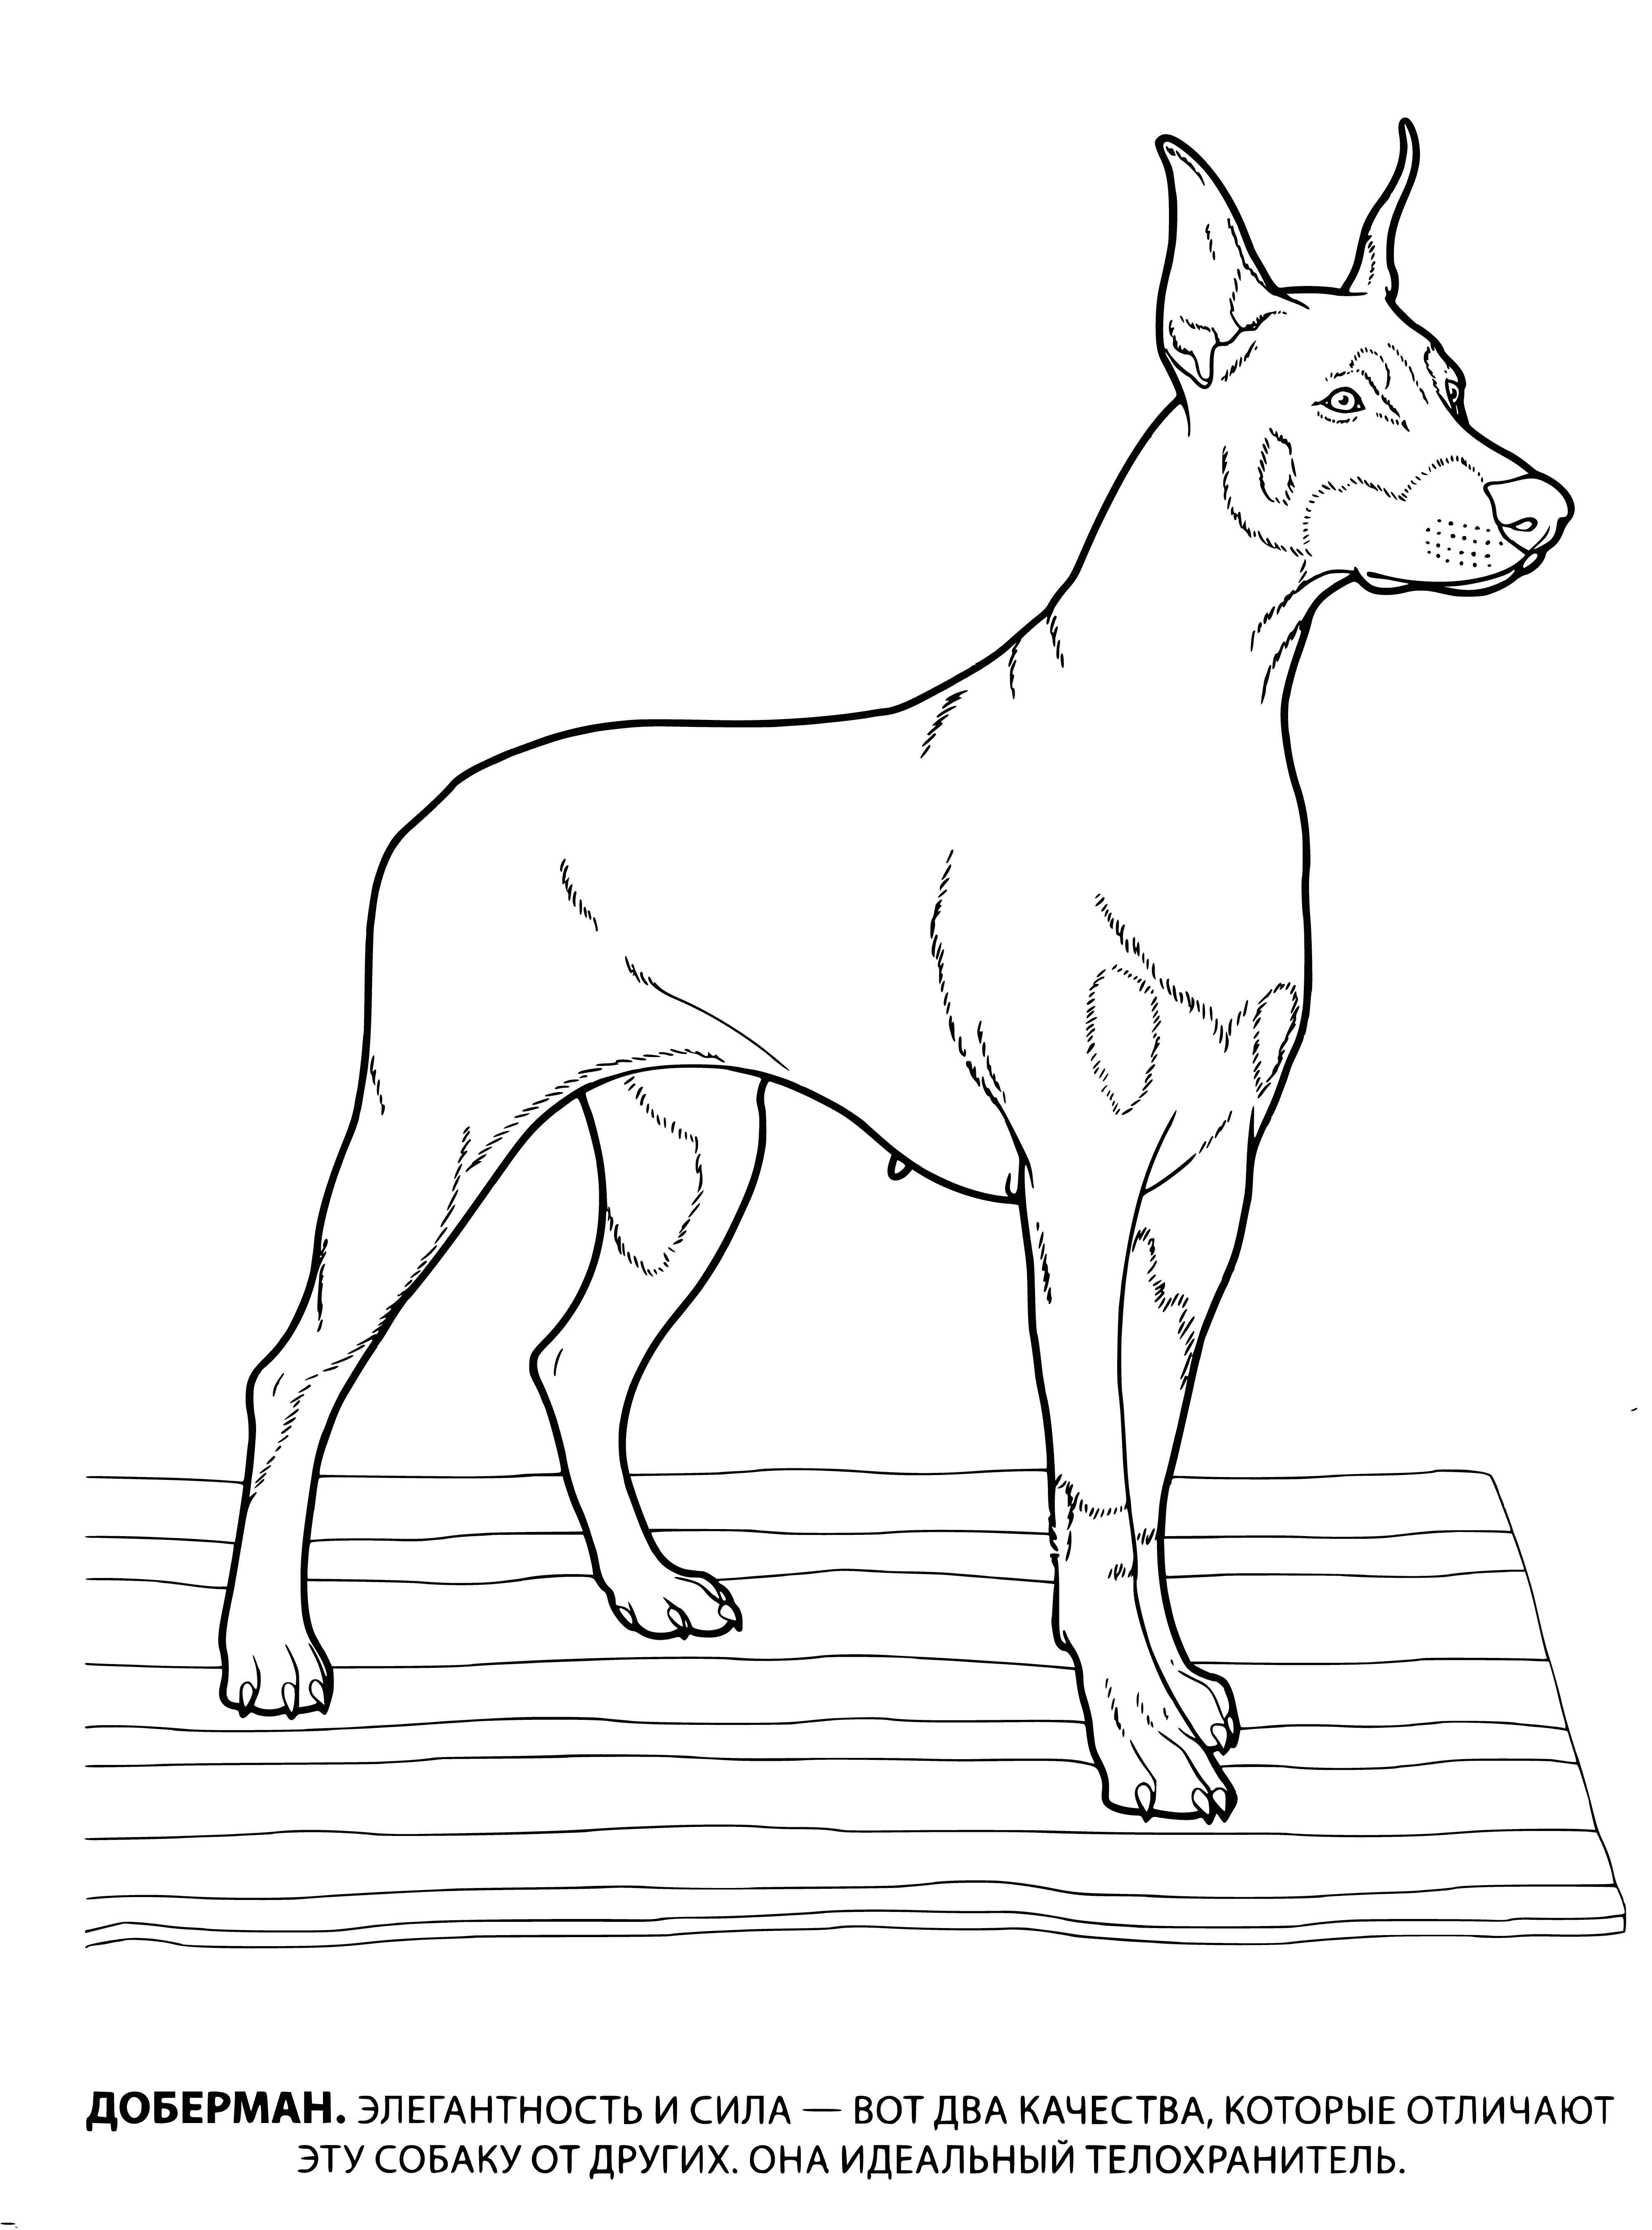 coloring page: Doberman: large, muscular dog with black coat and tan markings; loyal family guard dog, intelligent & alert.